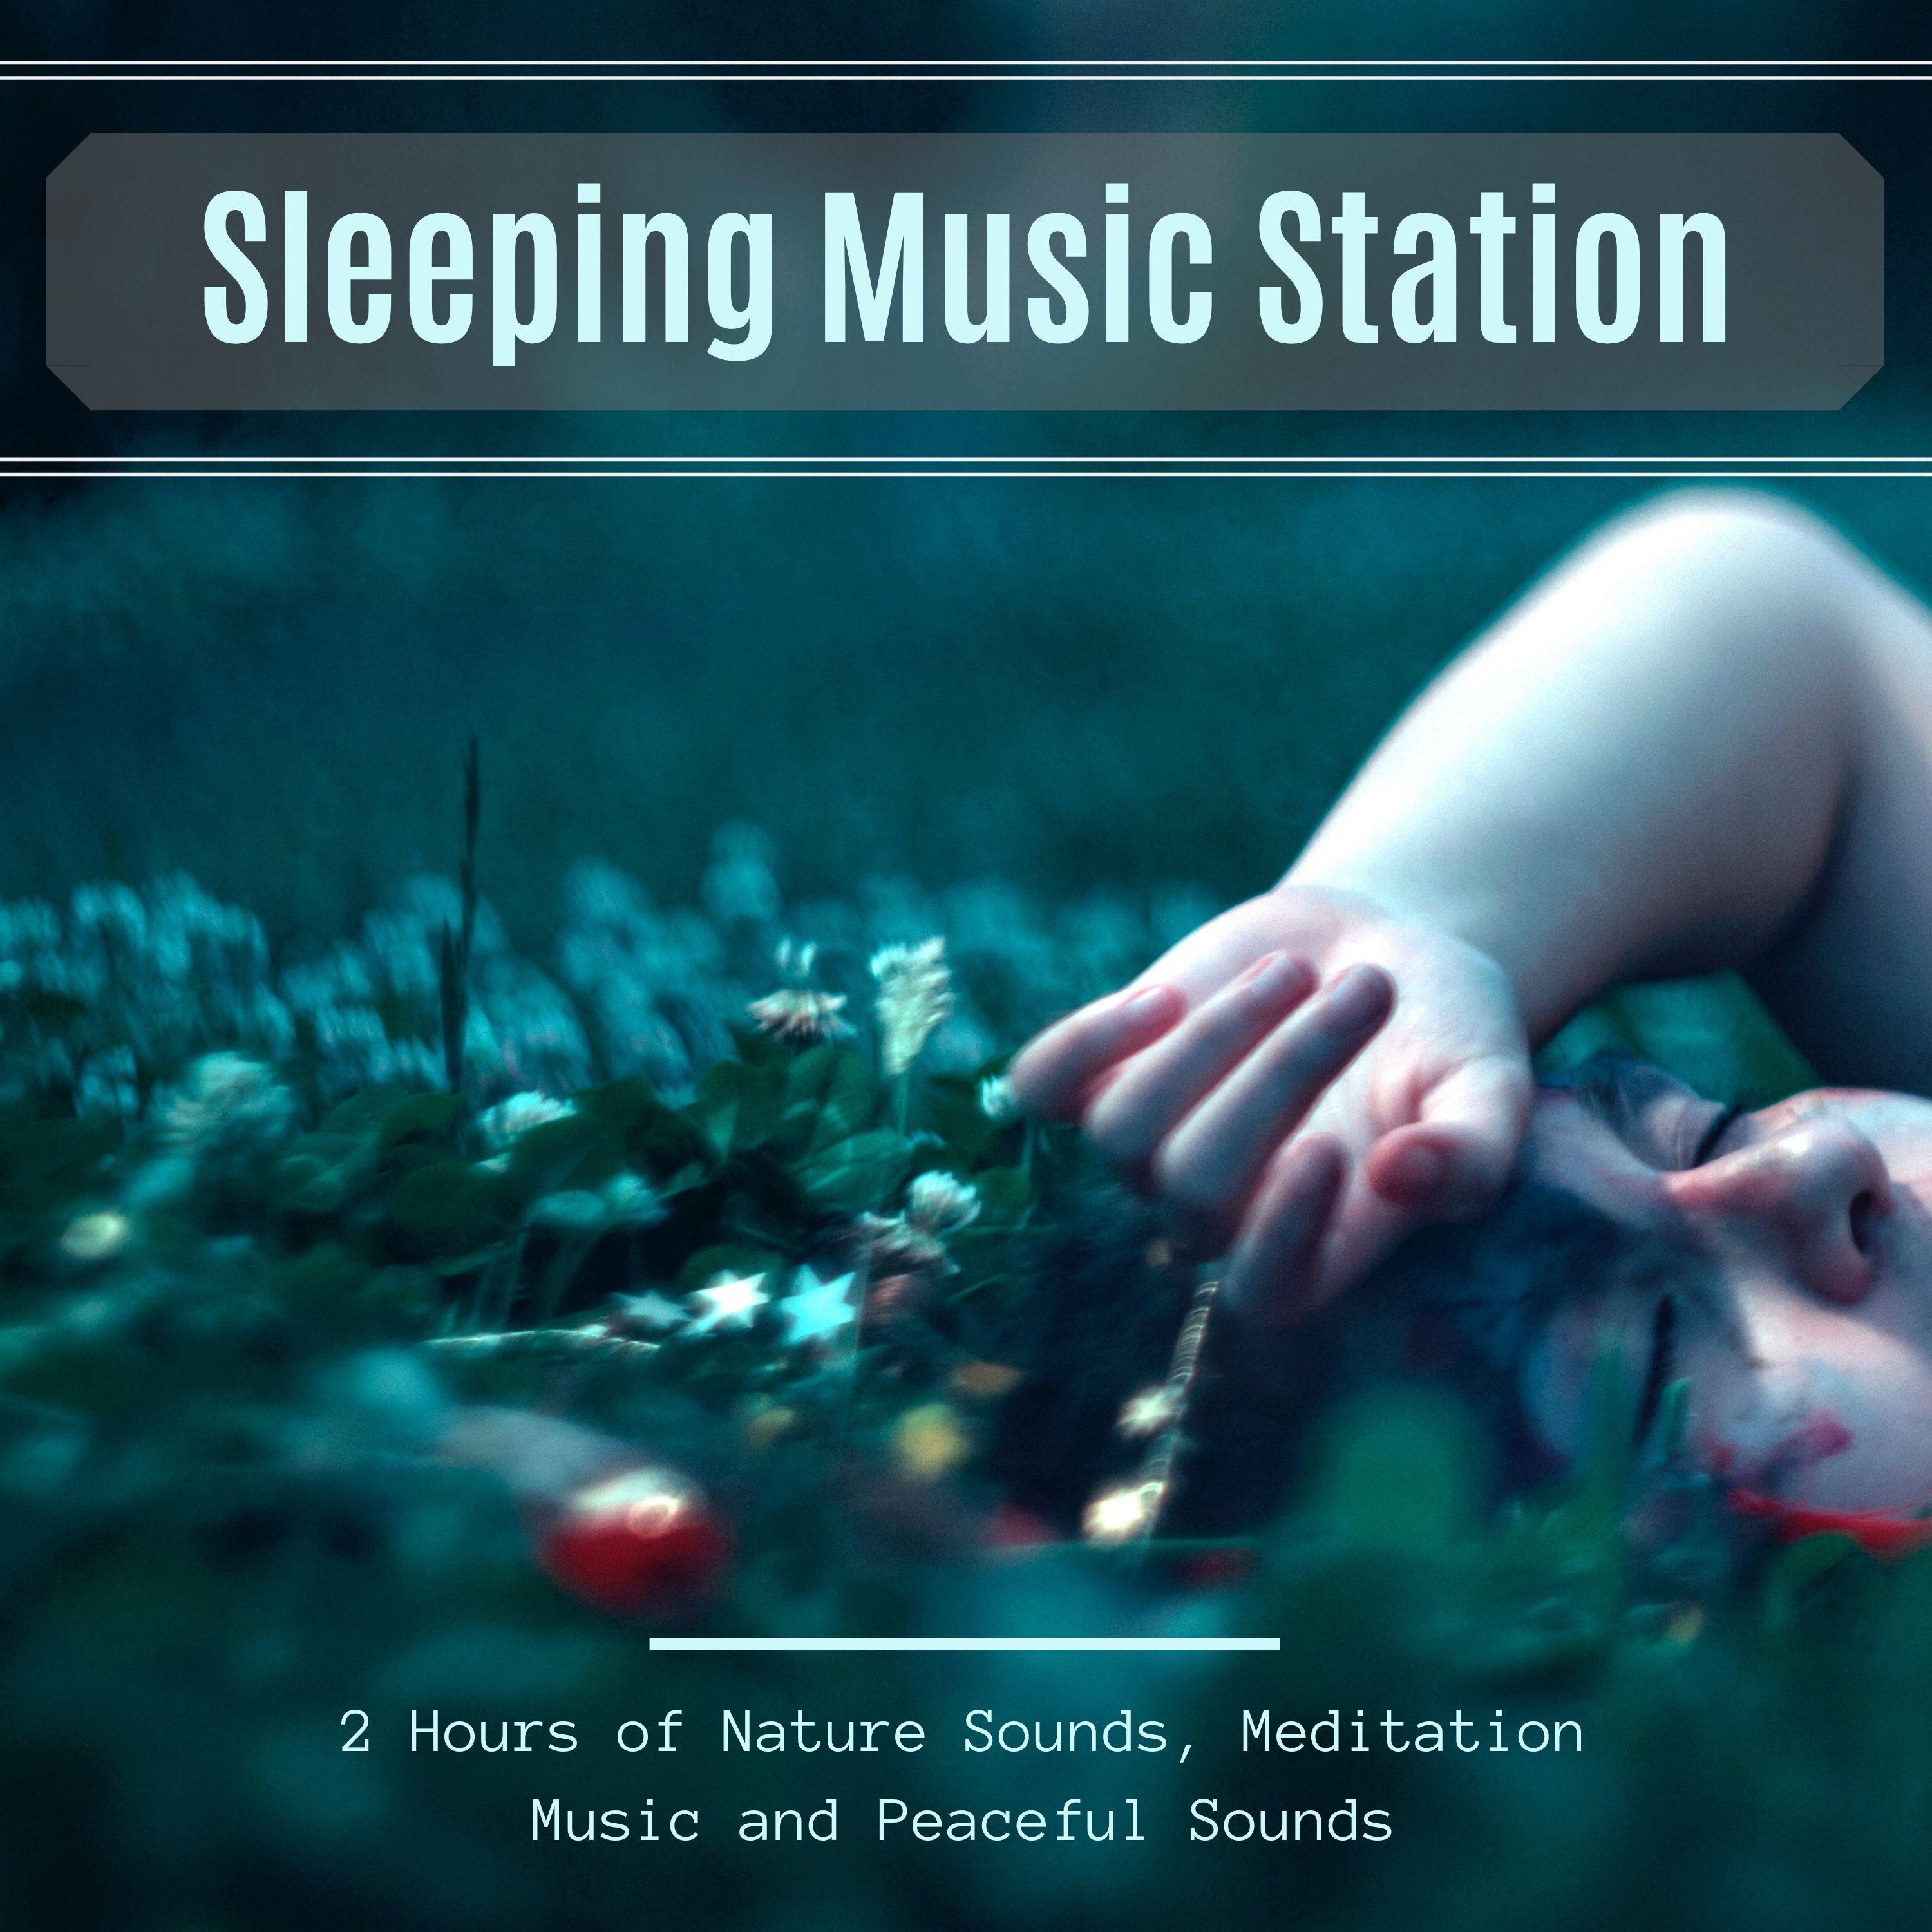 Sleeping Music Station: 2 Hours of Nature Sounds, Meditation Music and Peaceful Sounds